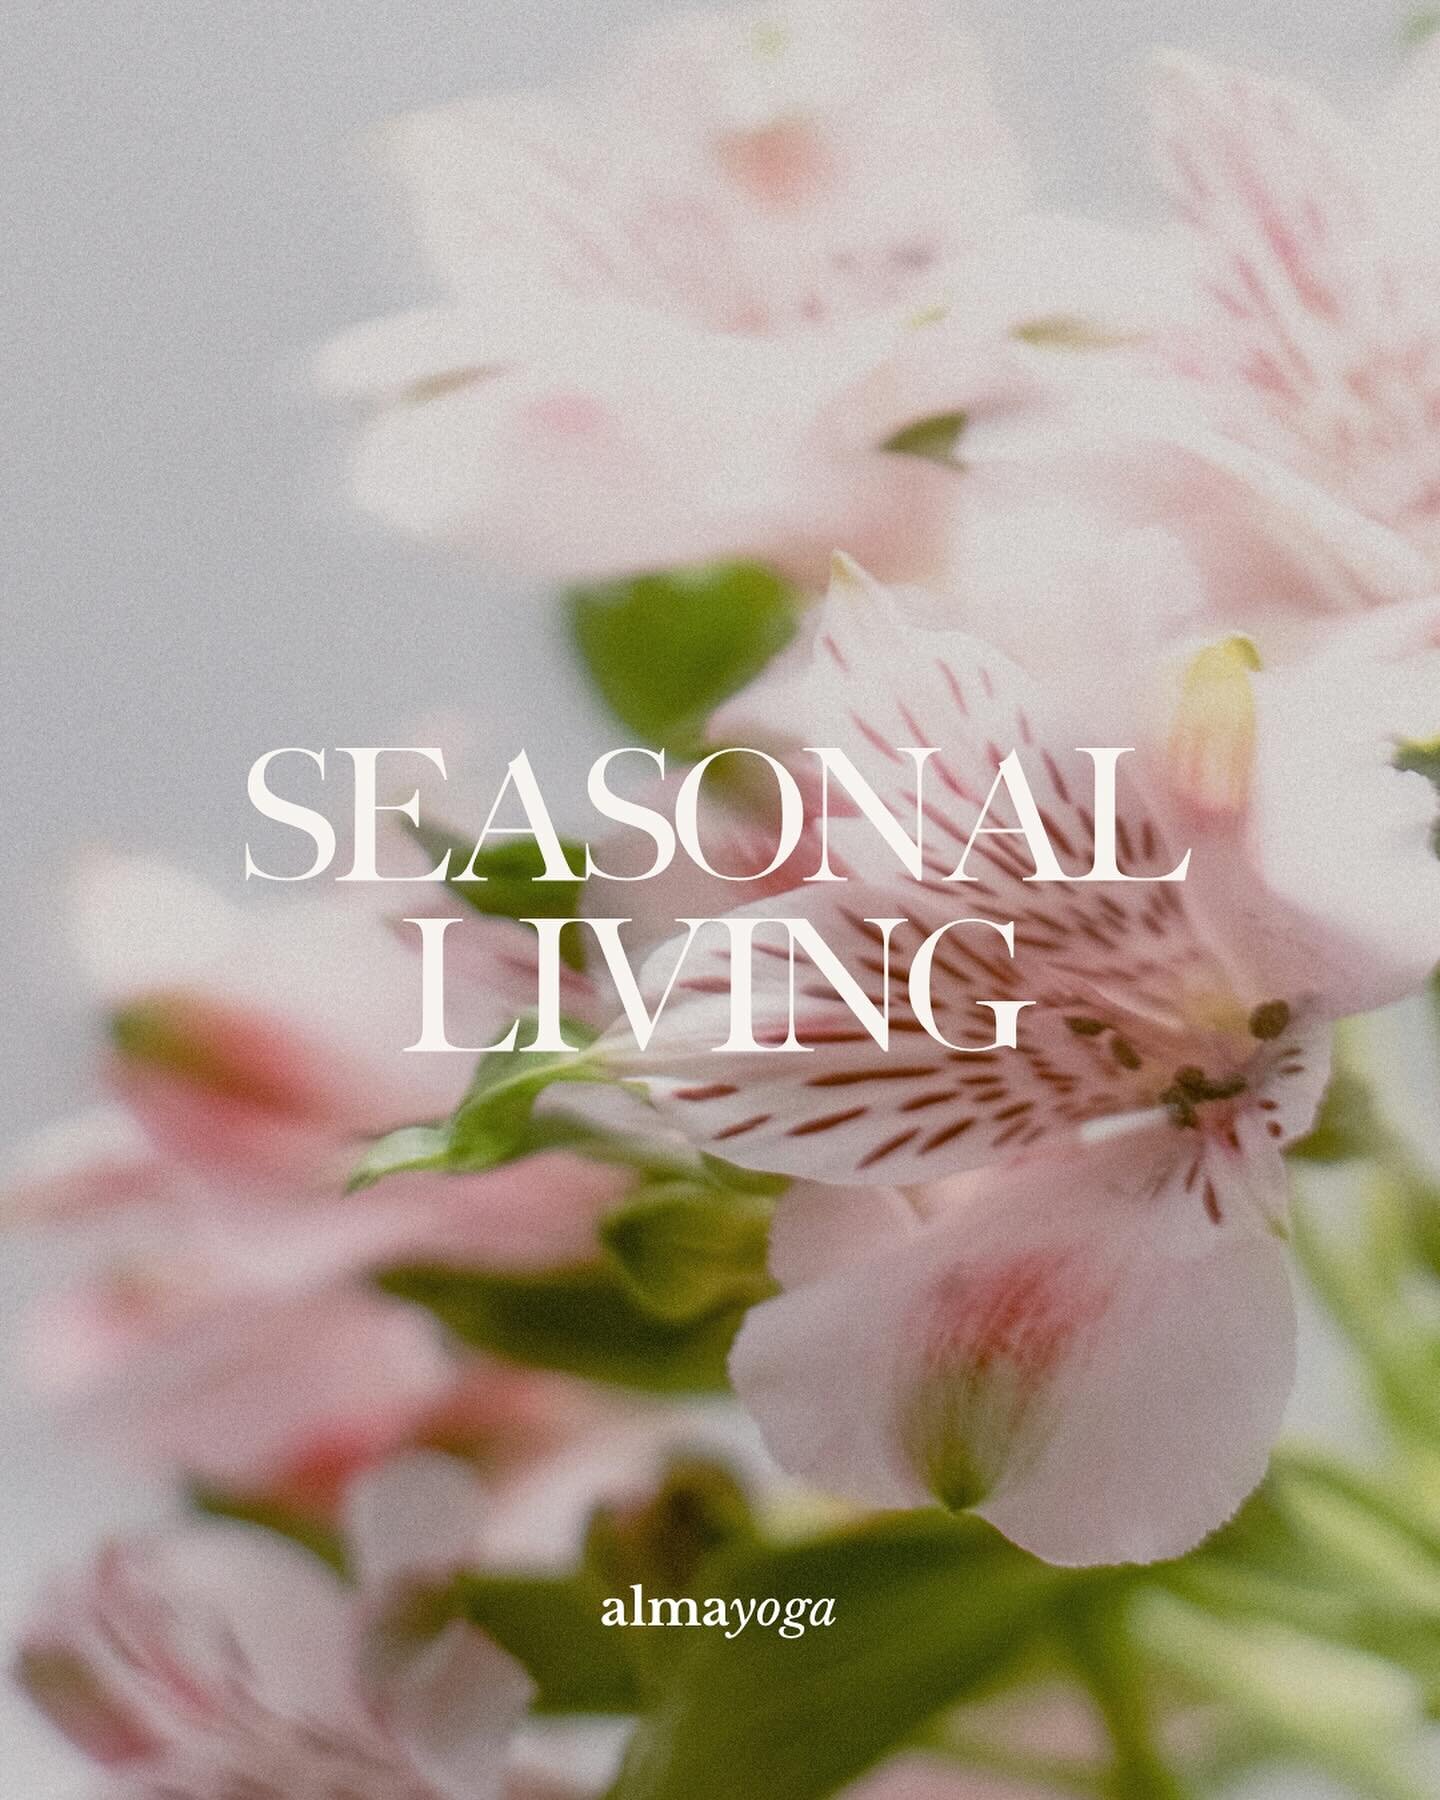 What do we mean by &lsquo;Seasonal Living&rsquo;? ✨

I often get asked this question when it comes to our &lsquo;Seasonal Resets&rsquo;, and I am so passionate about the topic that I could go on and on forever! But&hellip; in a nutshell:

Seasonal li